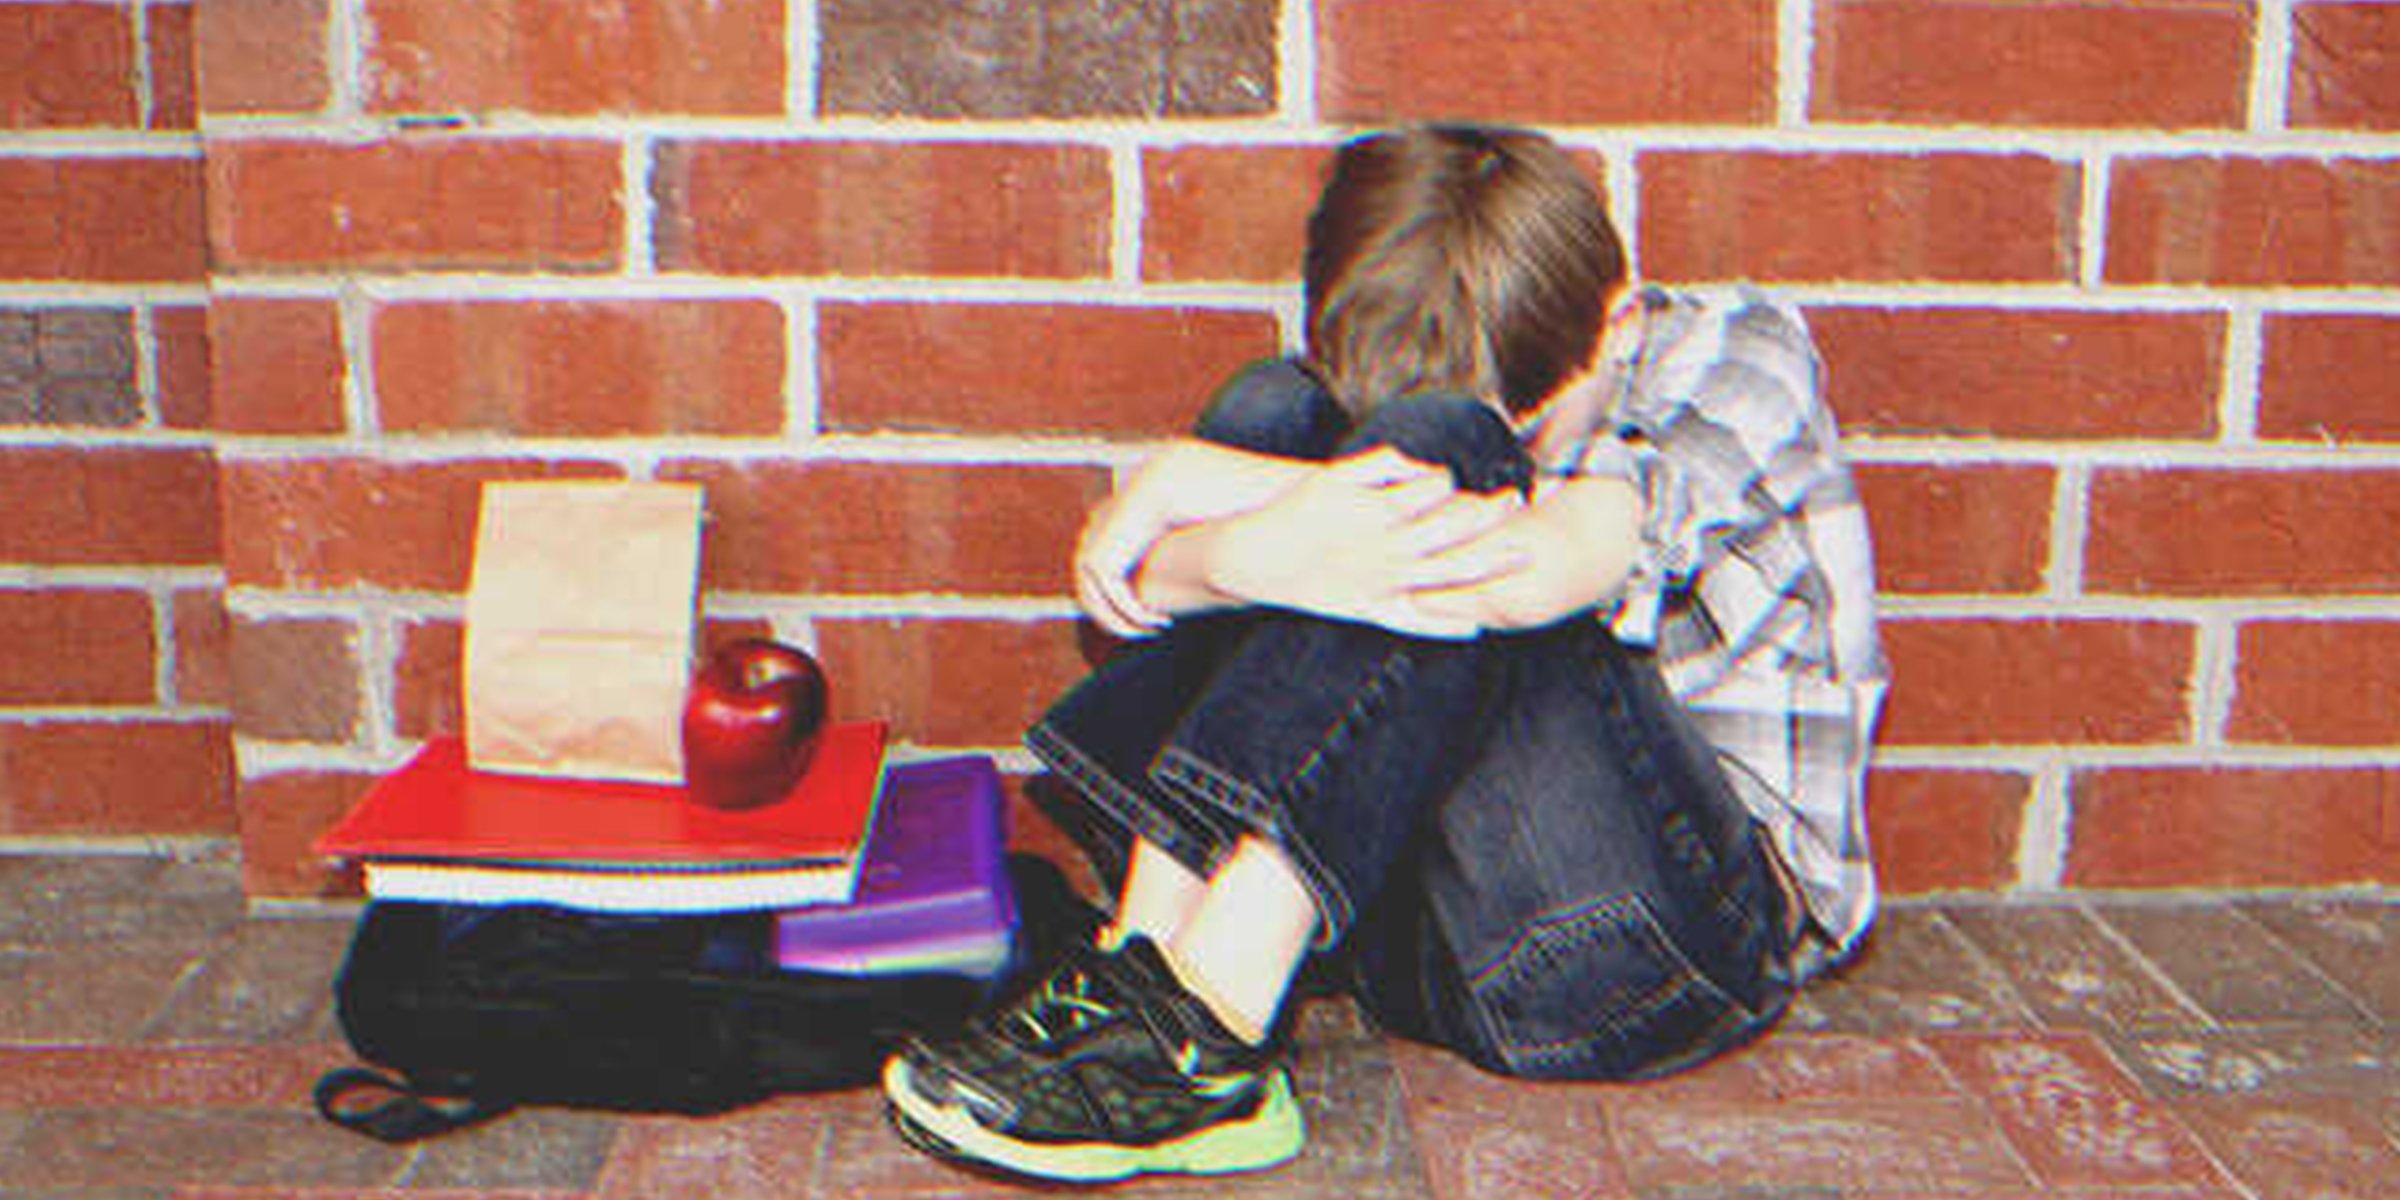 A sad kid sitting on the floor next to his lunch | Source: Shutterstock